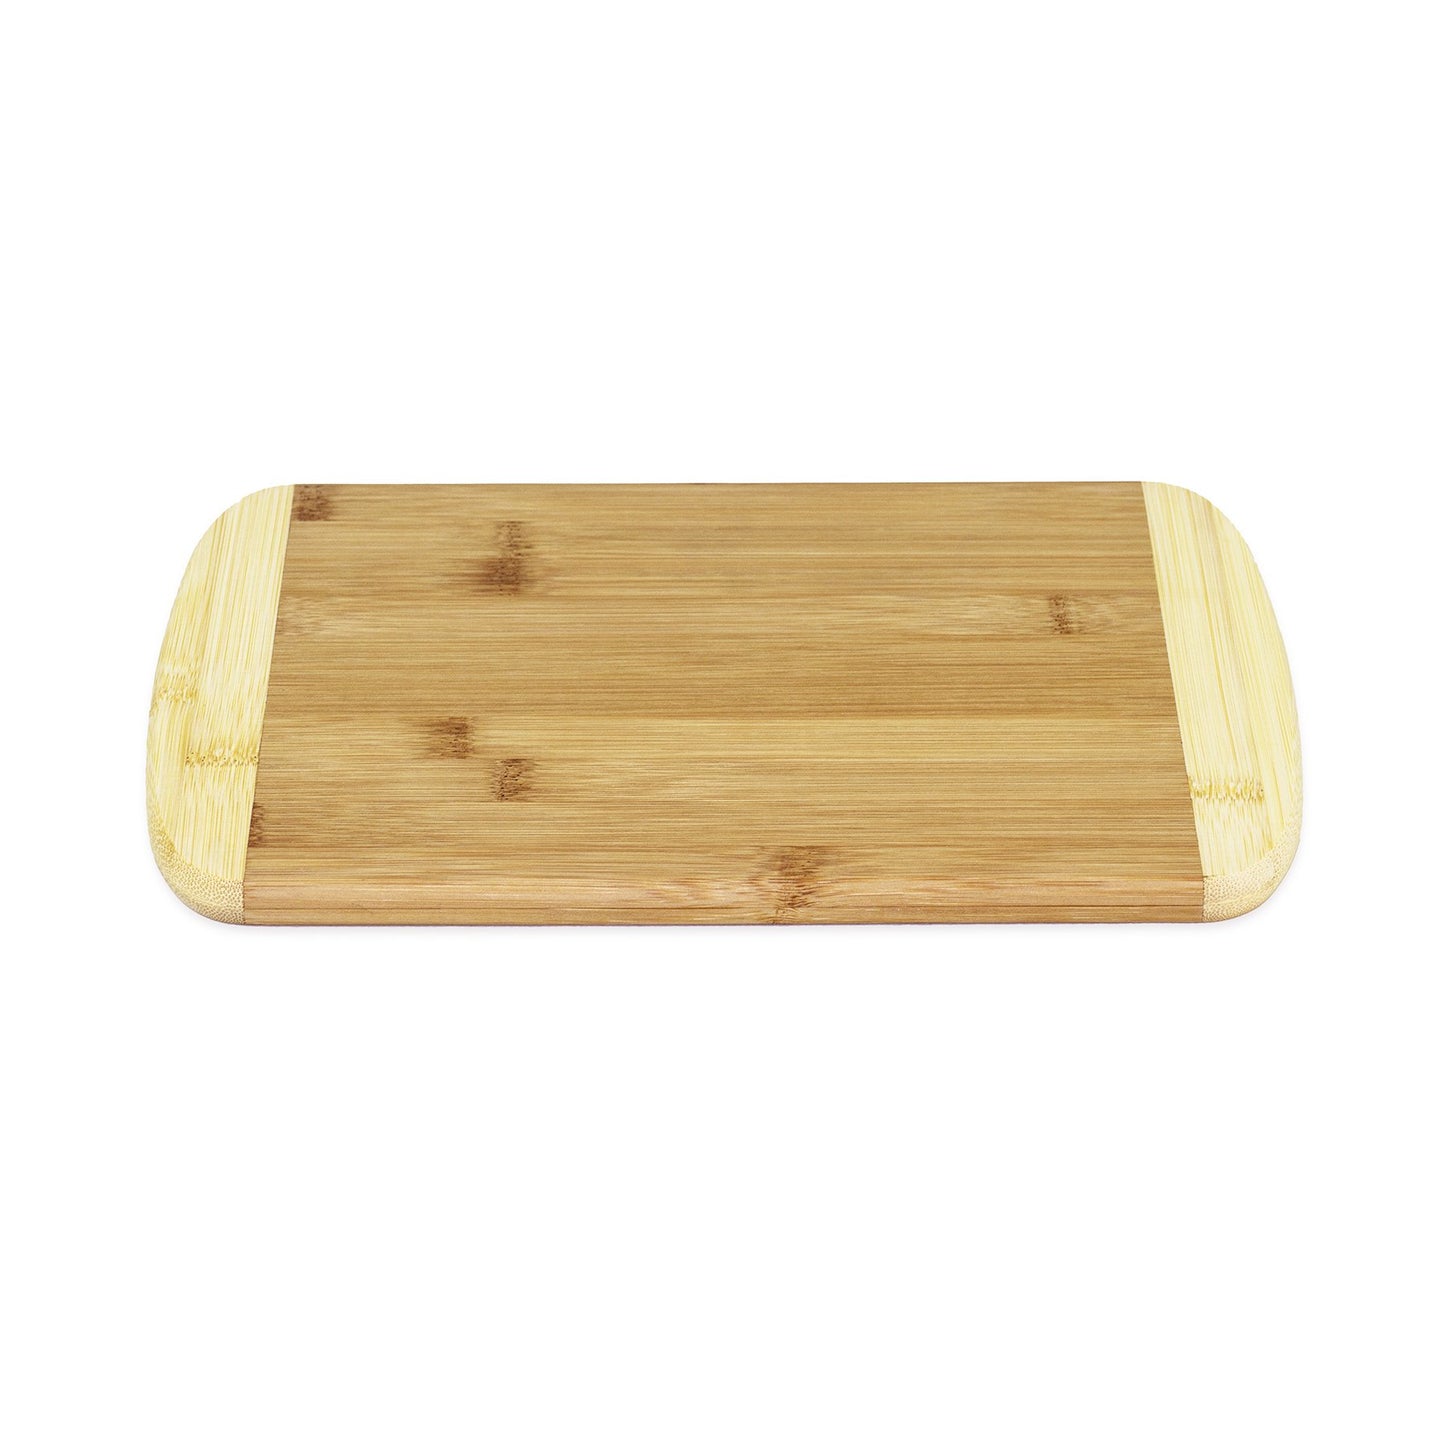 angled view of wood board on white background.